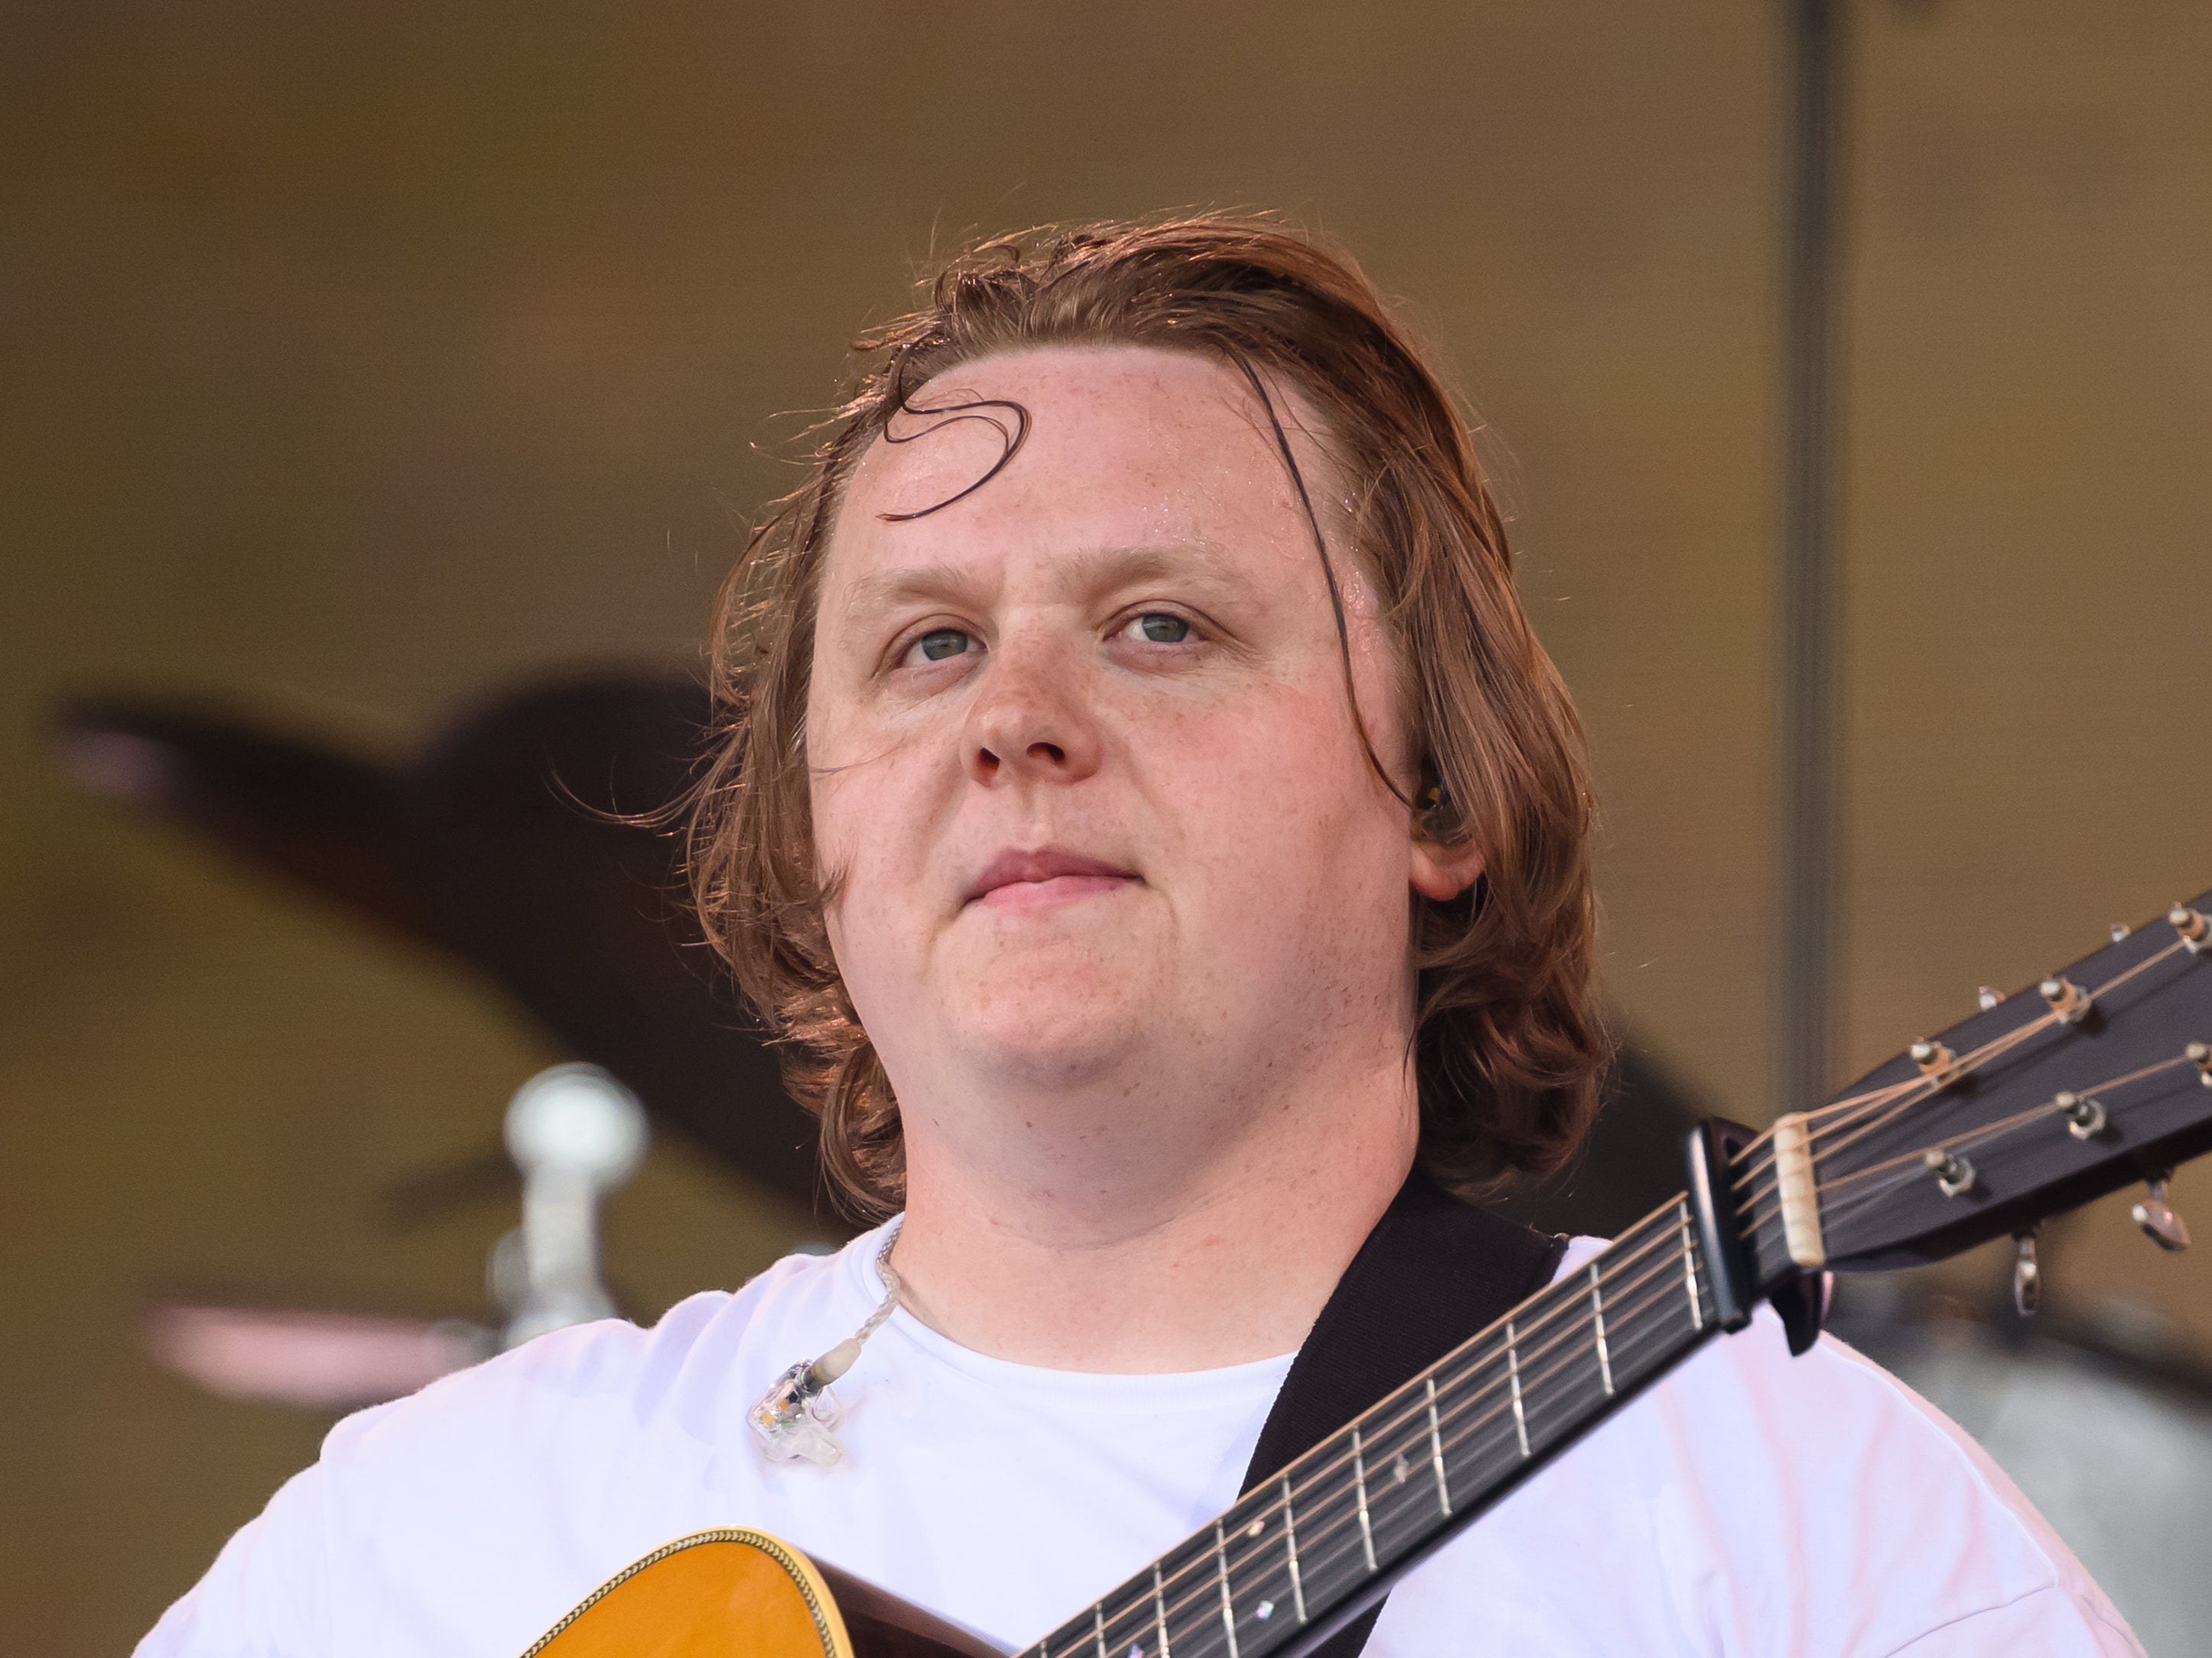 Lewis Capaldi is continuing his break from touring